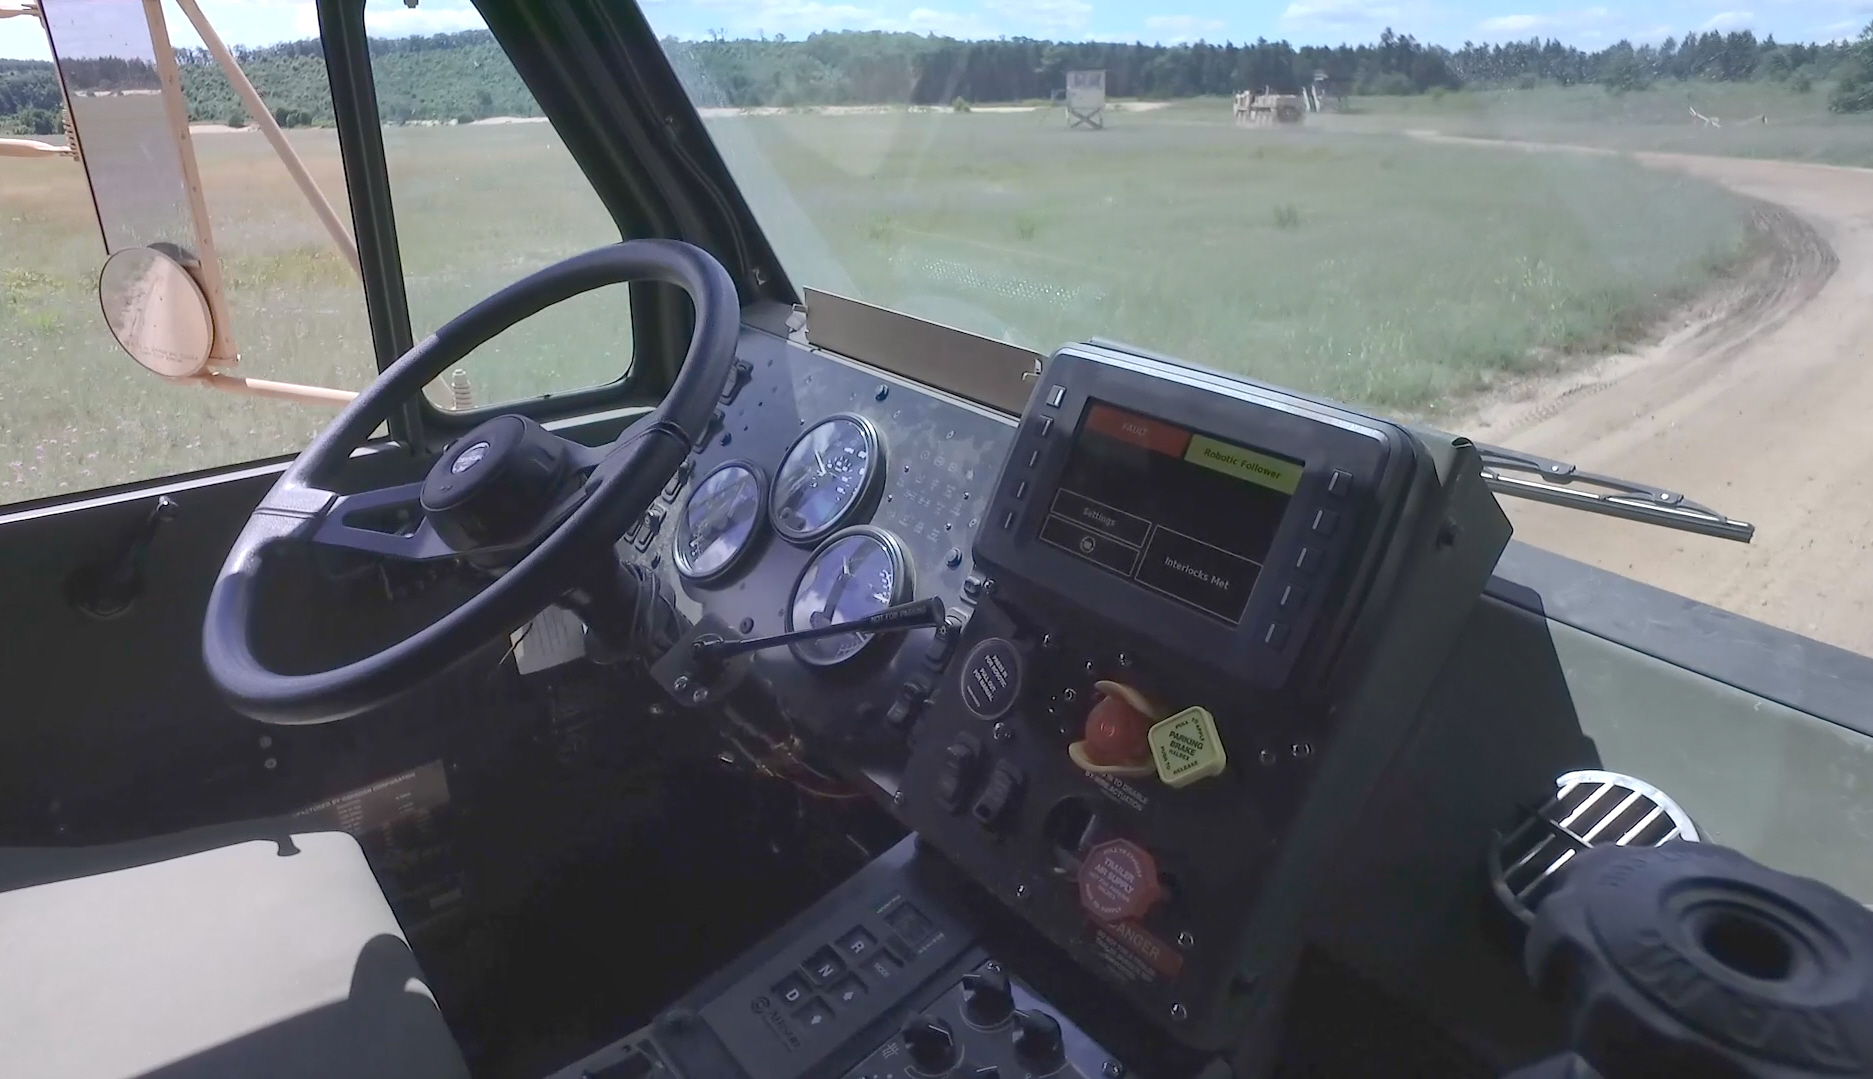 Inside the Leader Follower Program vehicle in action with no operator